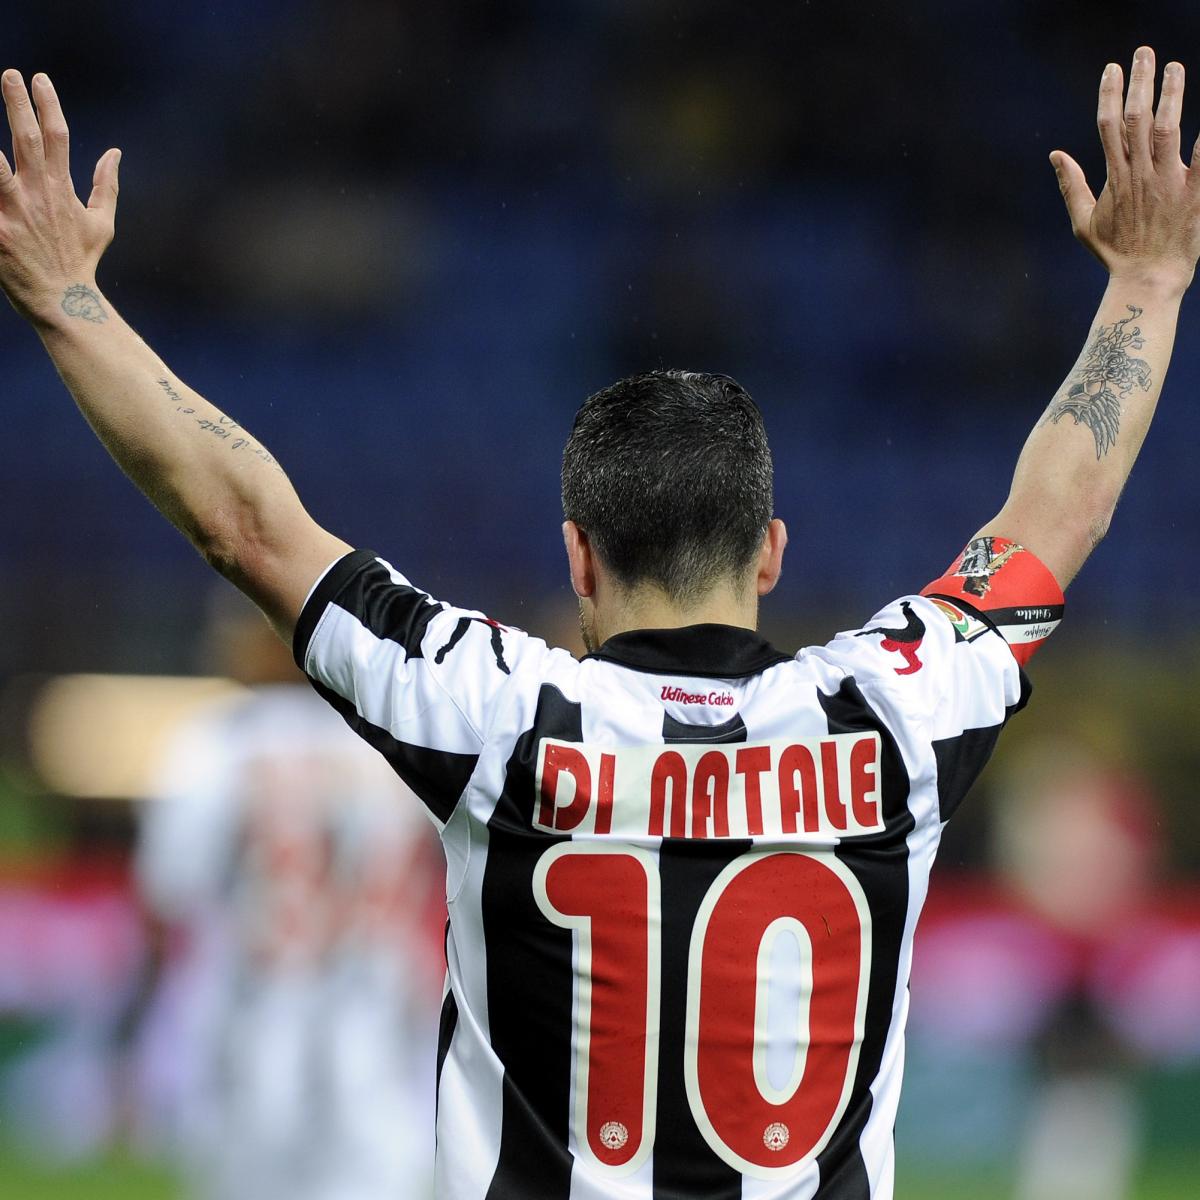 Natale A Natale.Udinese Captain Antonio Di Natale A Man To Admire A Striker To Fear Bleacher Report Latest News Videos And Highlights